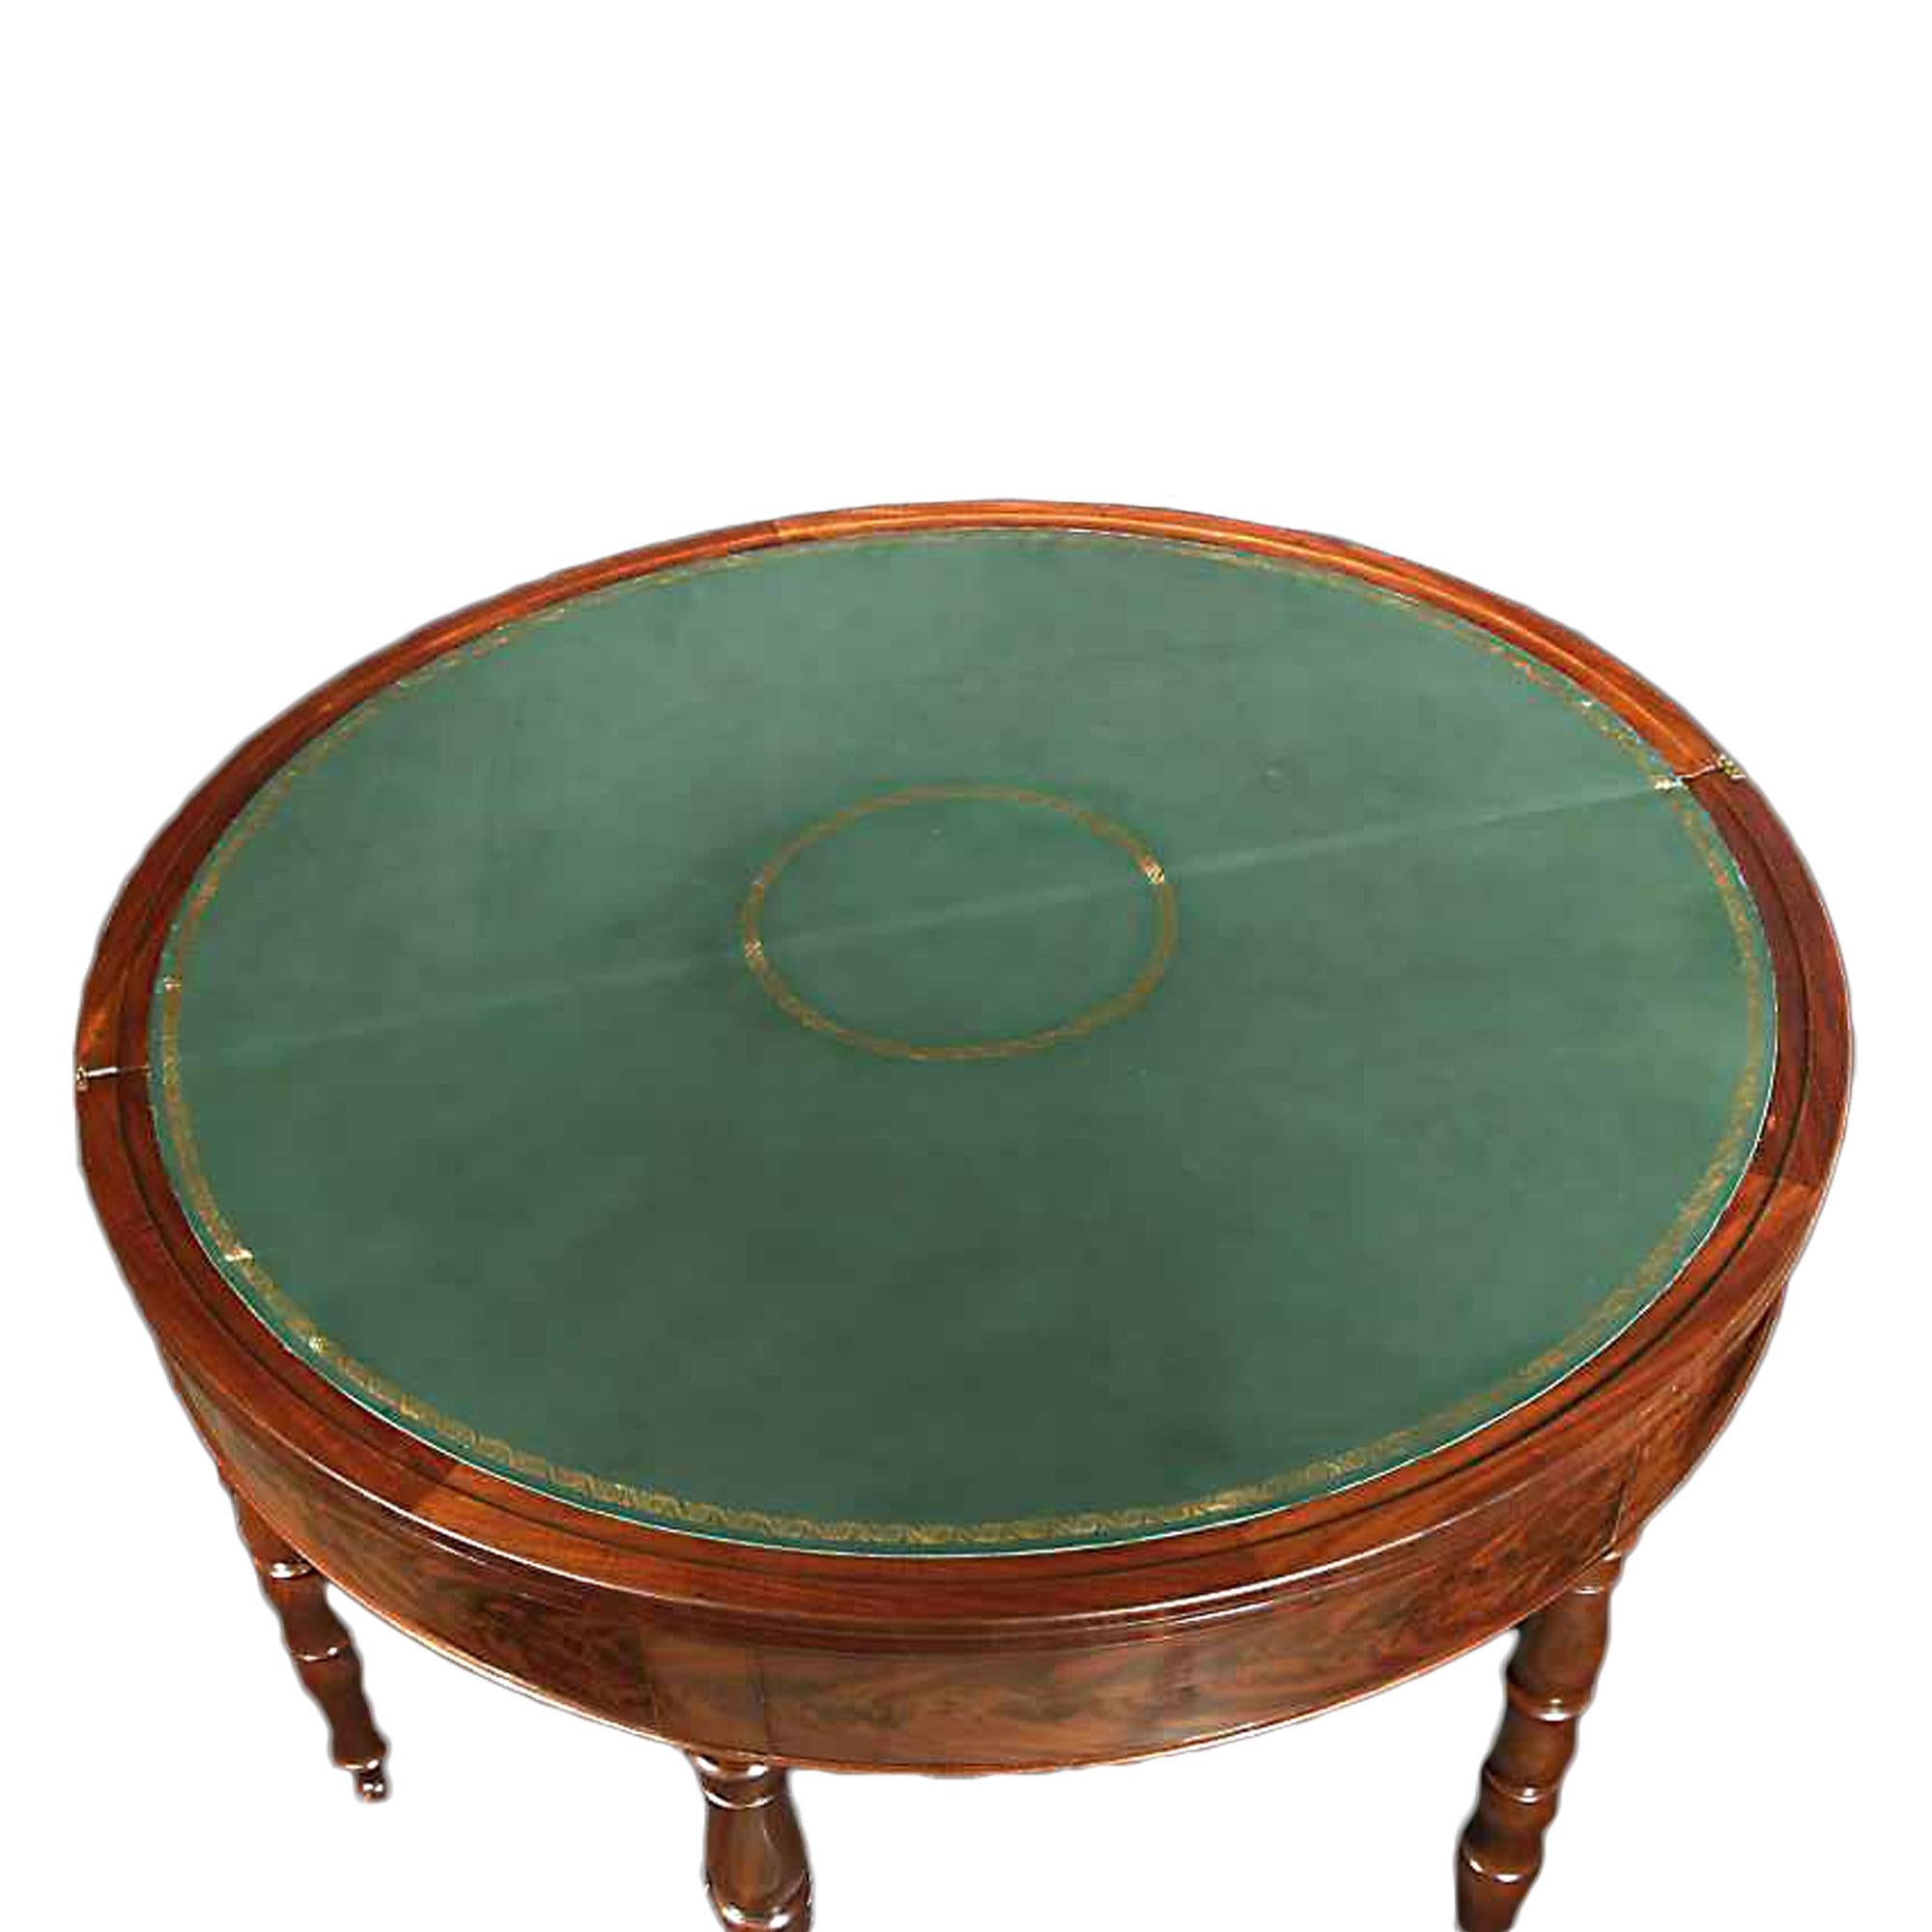 A very handsome French mid-19th century French Charles X style crouch mahogany games table. The table is raised by 5 solid mahogany turned baluster legs. The half round apron and top has an exquisite crouch mahogany inlay with a moulded border. The